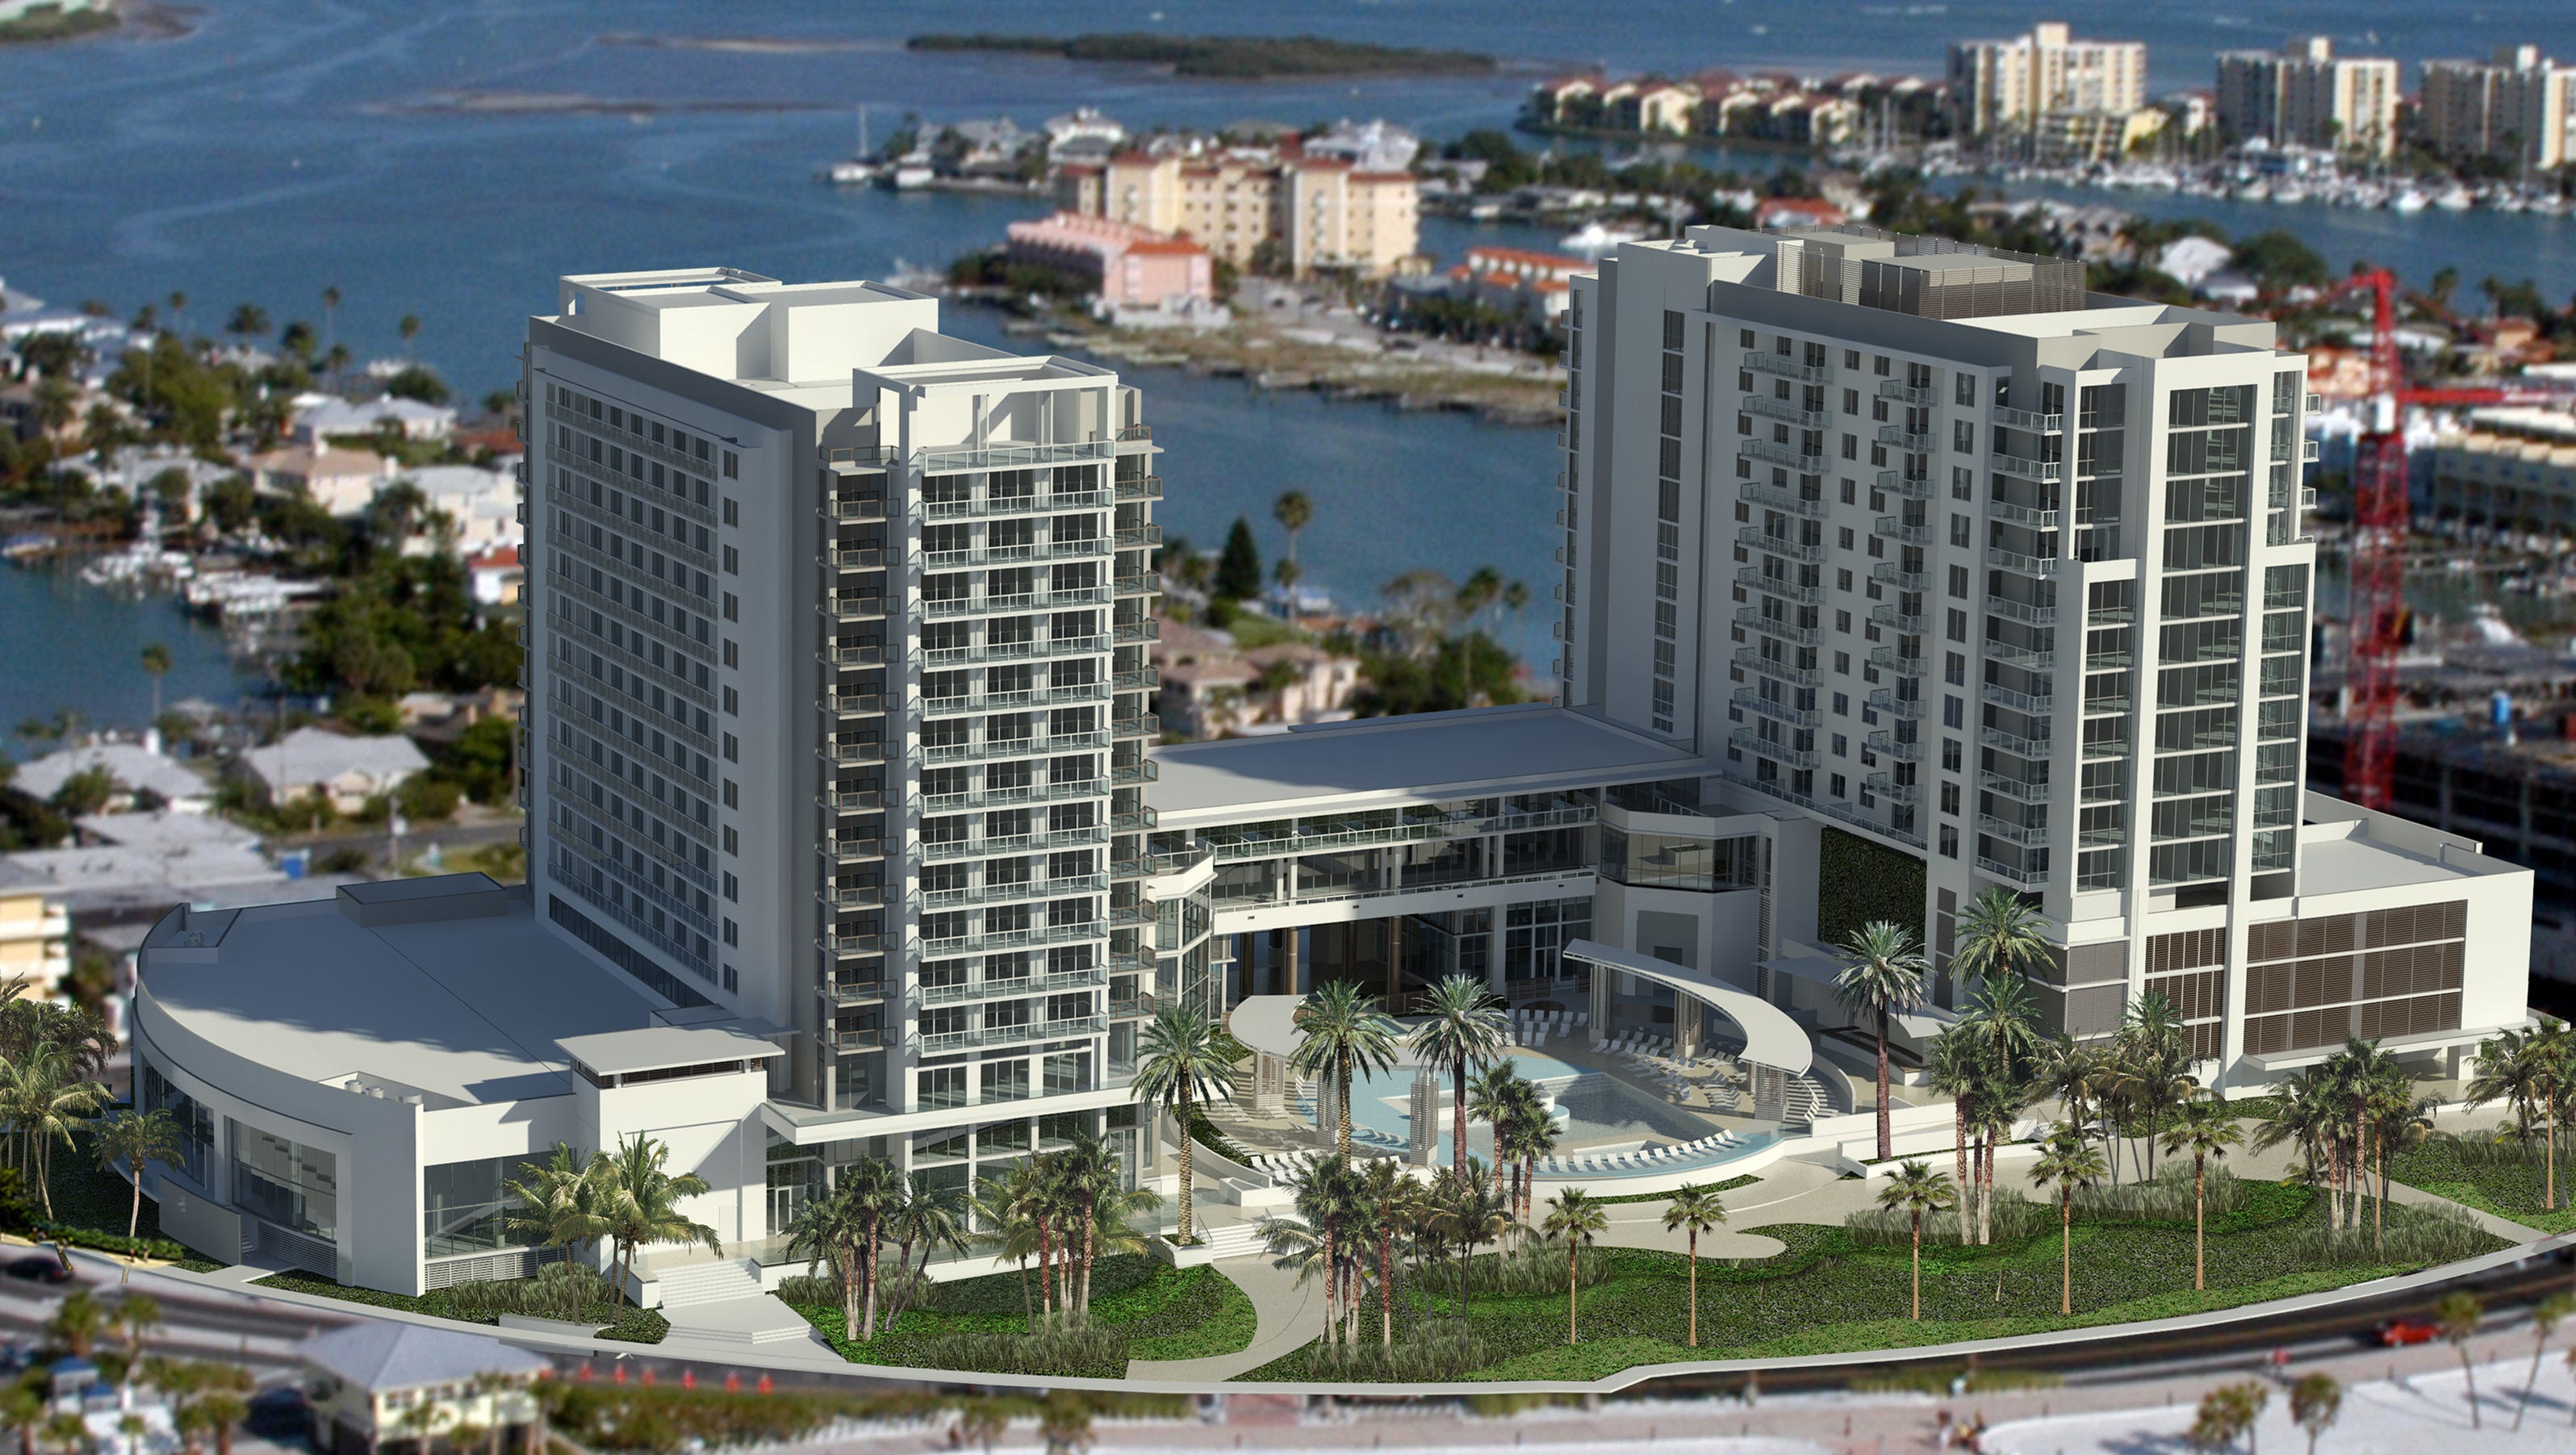 New hotels will change face Clearwater Beach WTSP News